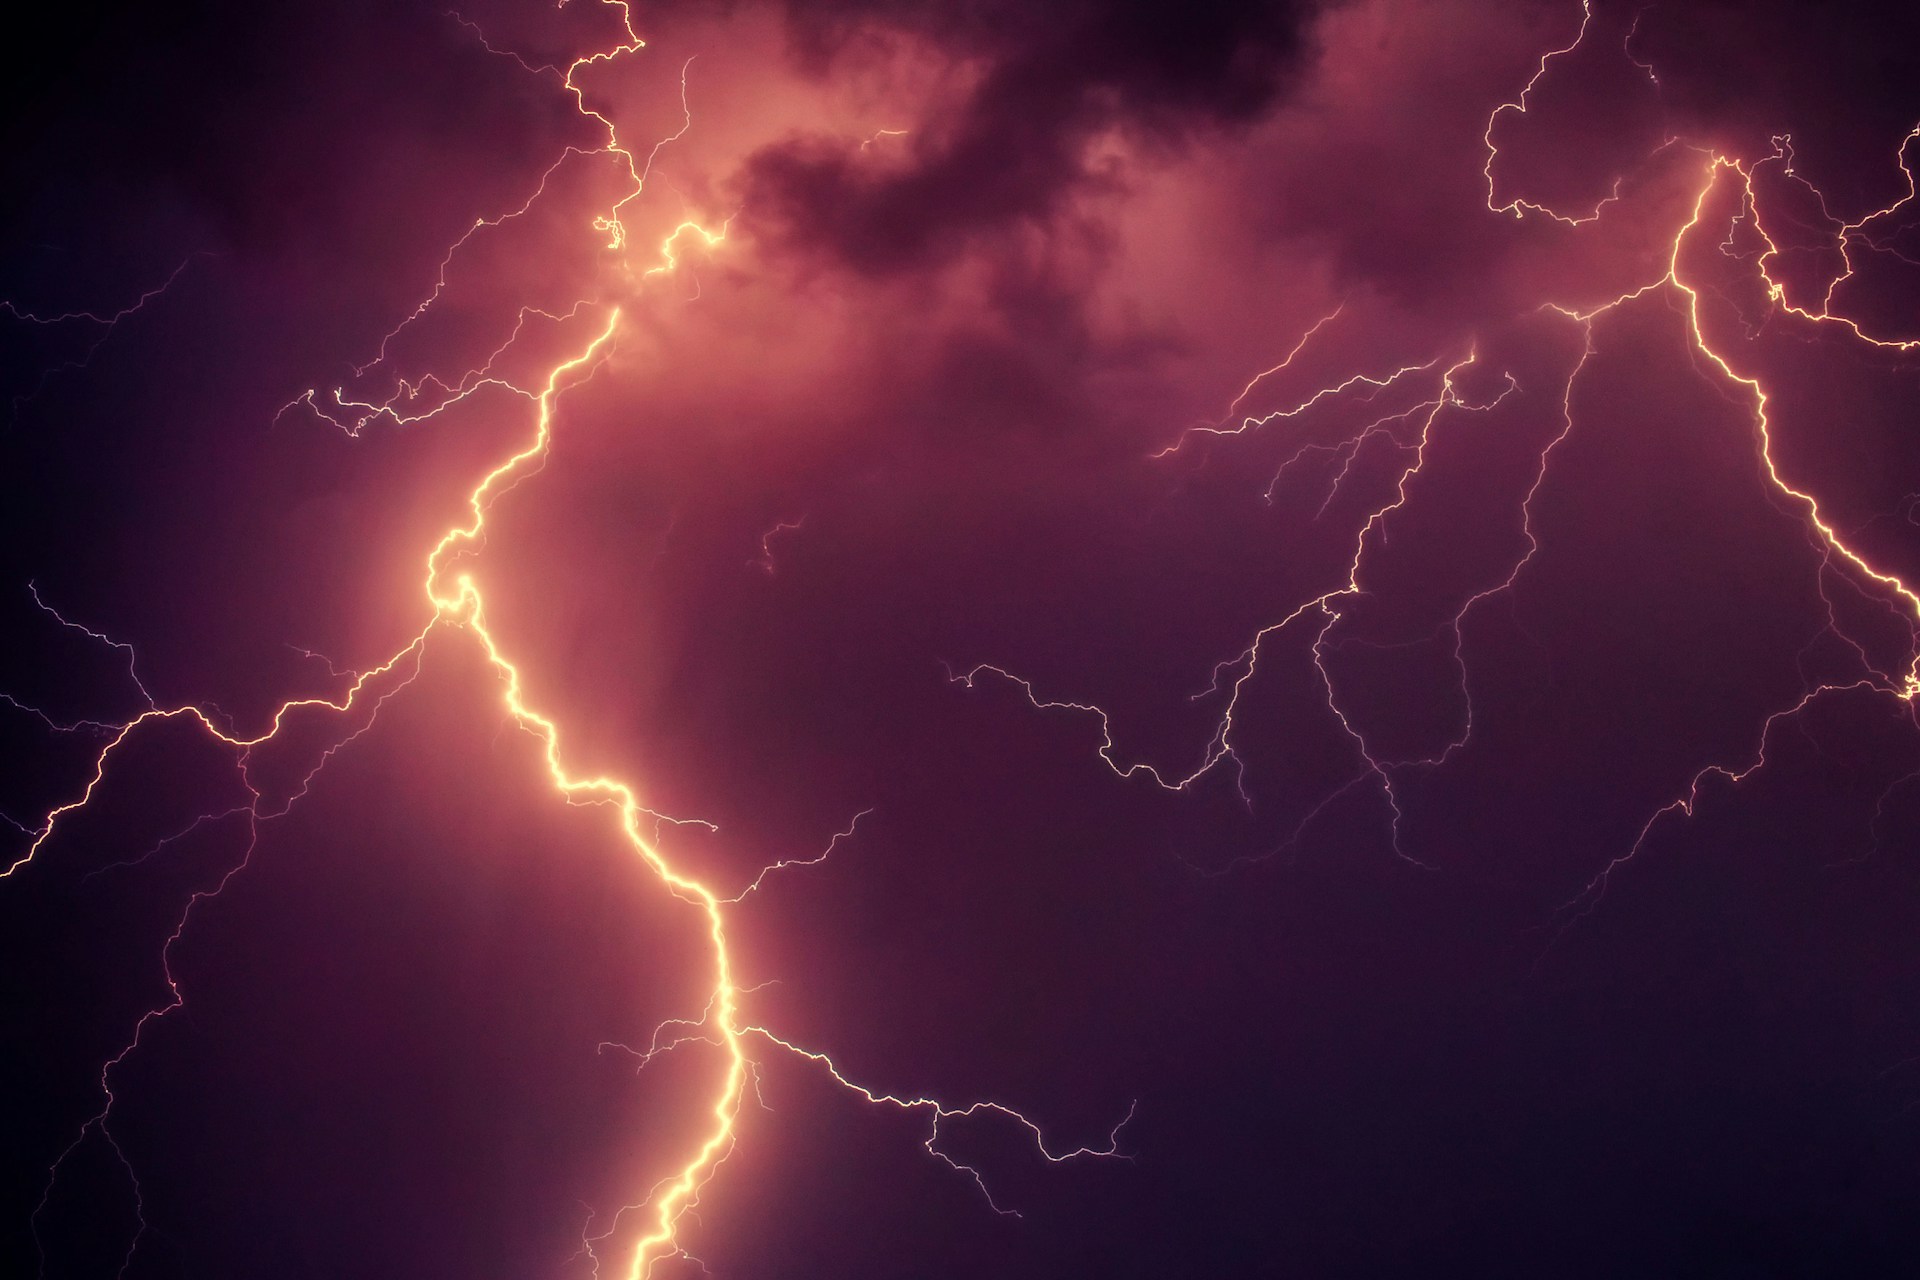 Lightning Detection Systems: All You Need To Detect Lightning